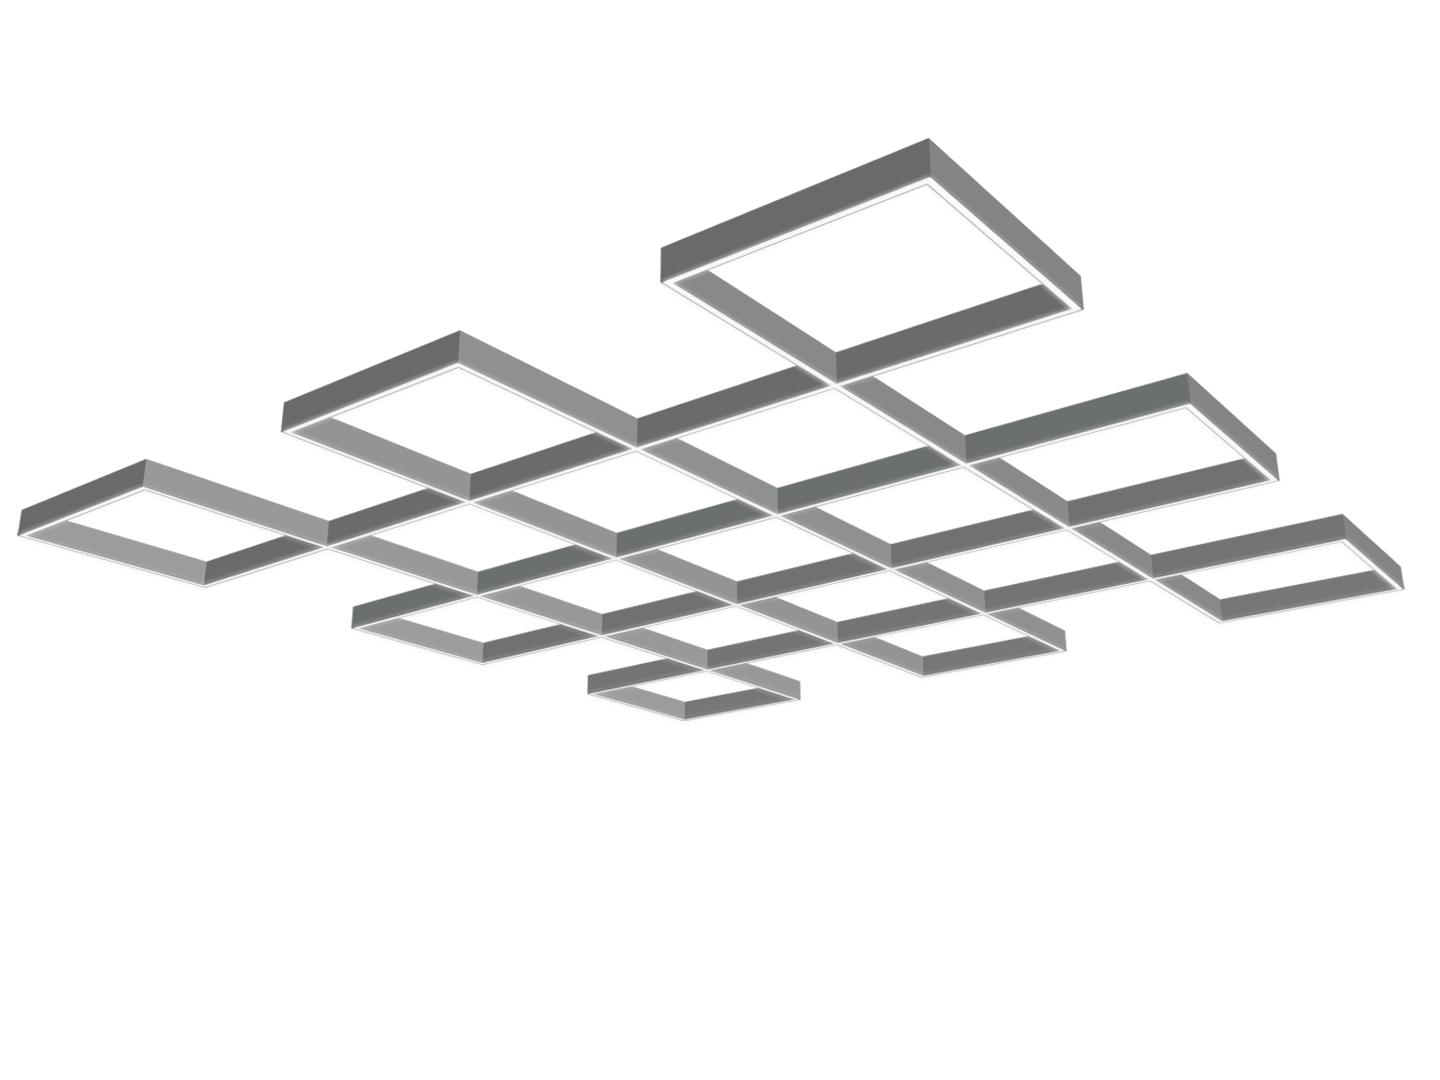 Square LED lights connected in a checkerboard pattern